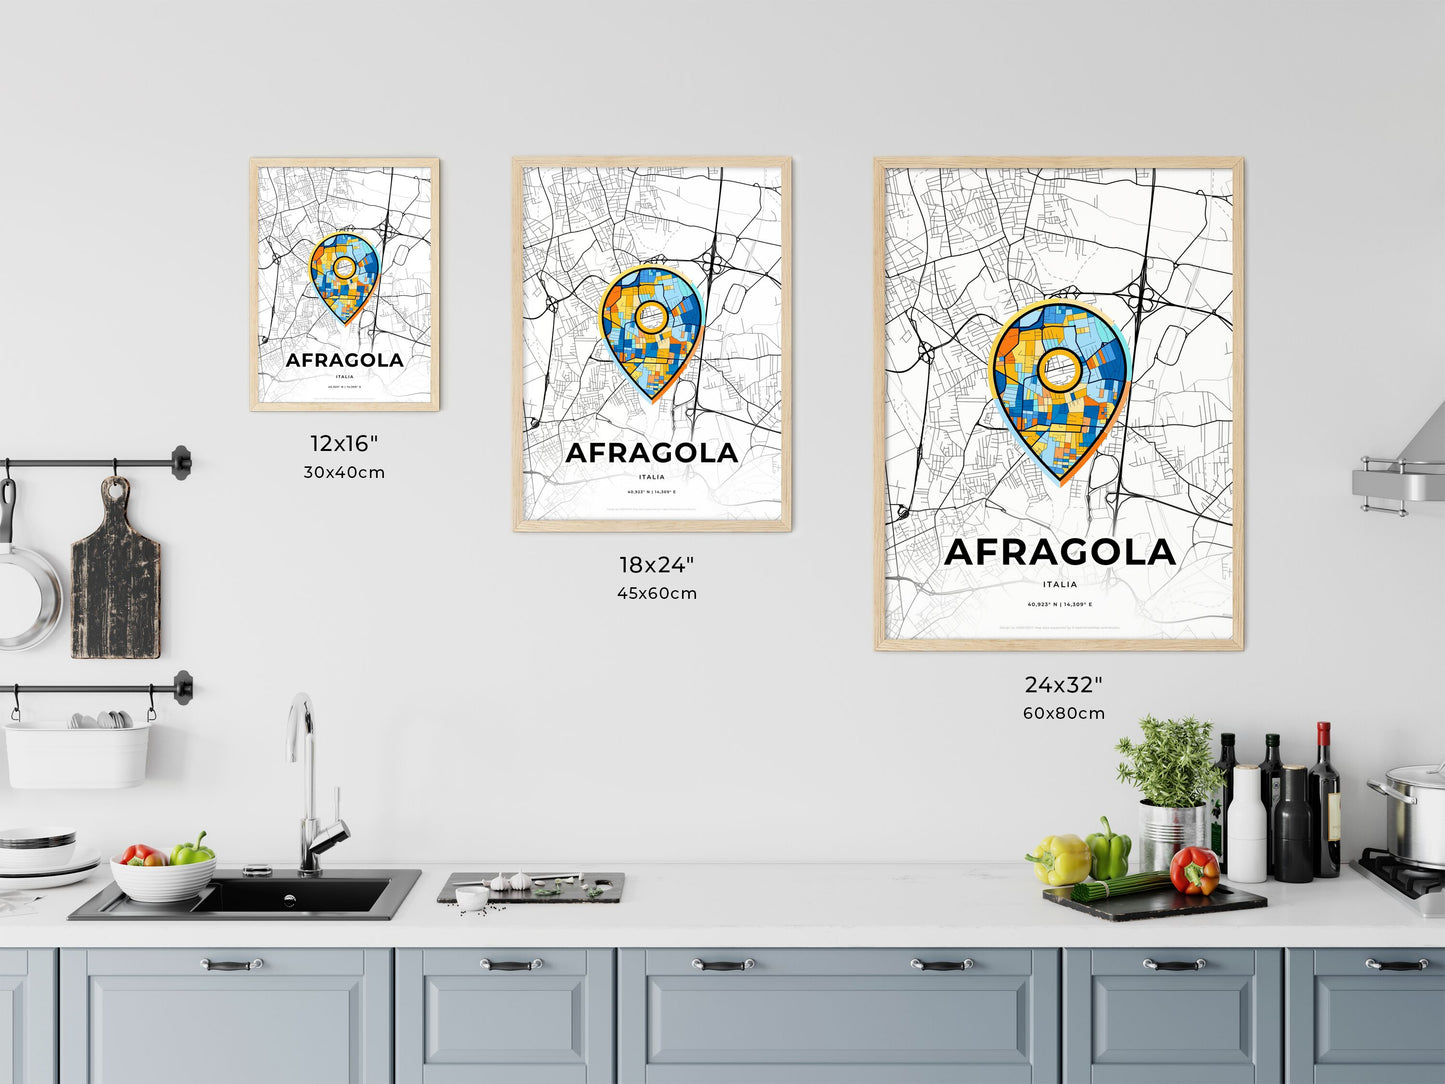 AFRAGOLA ITALY minimal art map with a colorful icon. Where it all began, Couple map gift.